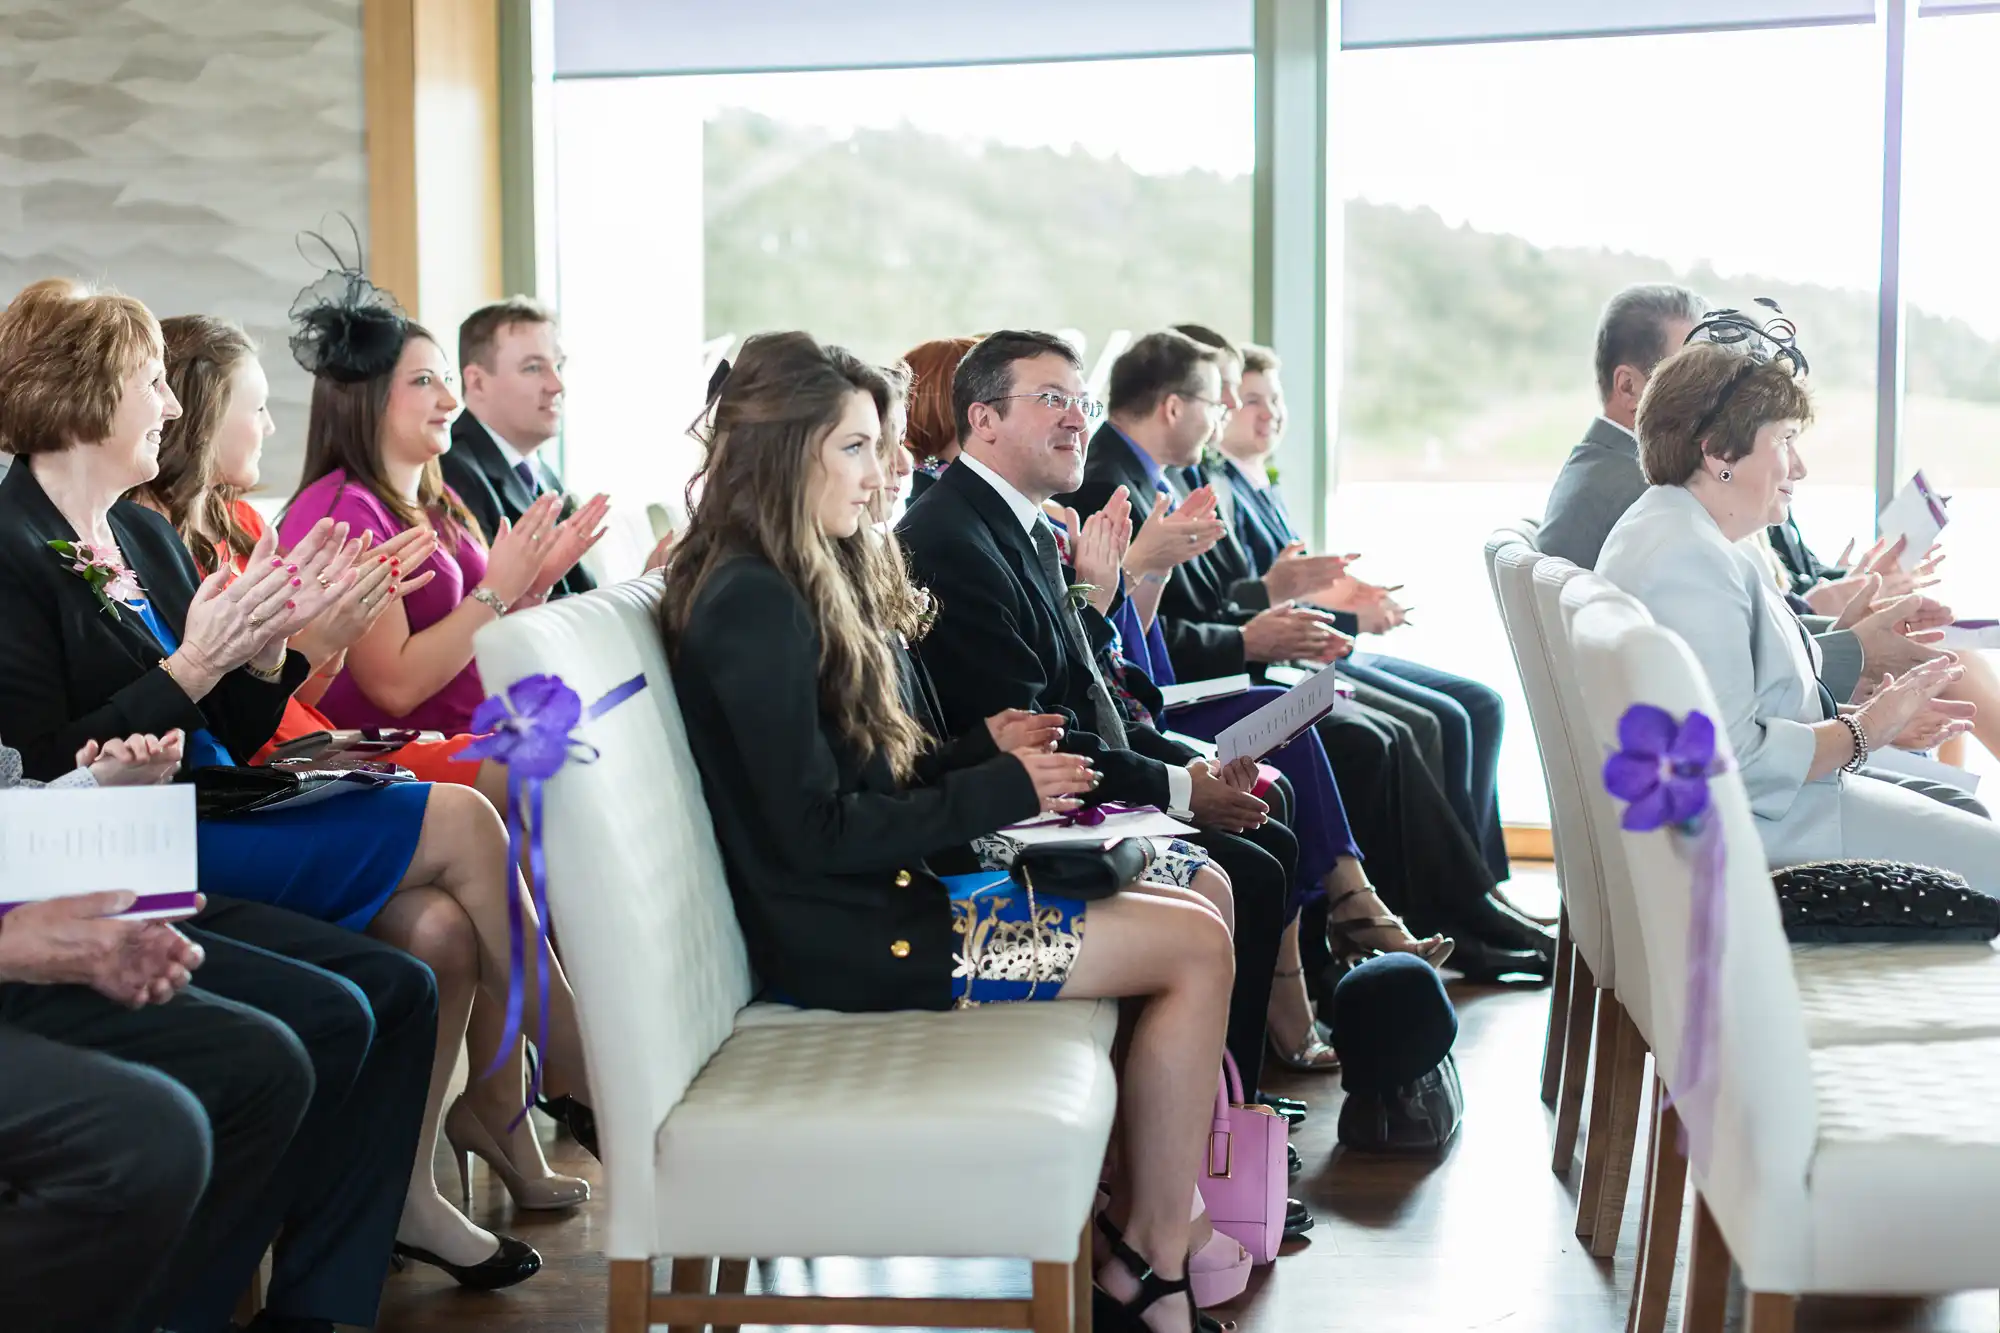 Guests at a formal event, seated in rows, clapping and holding programs, with a venue featuring large windows and a view.